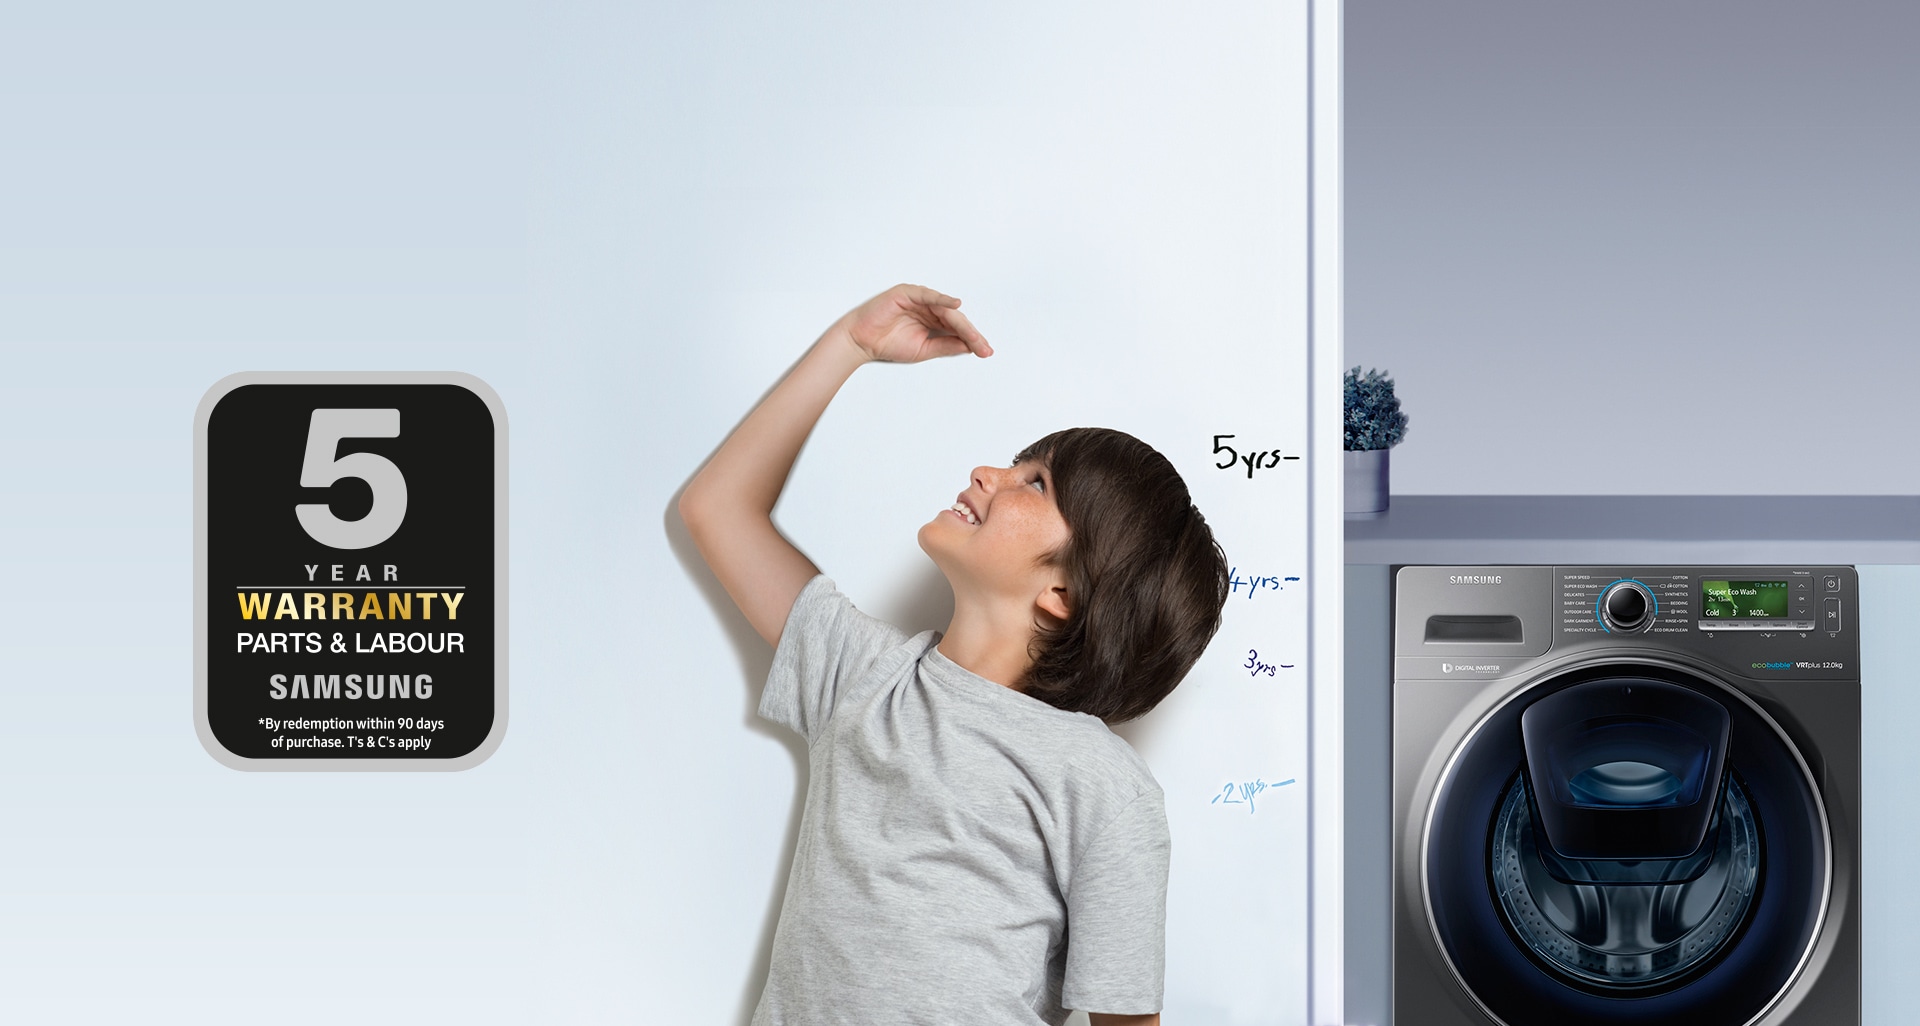 Home Appliances: Appliances for your Home | Samsung UK1920 x 1026